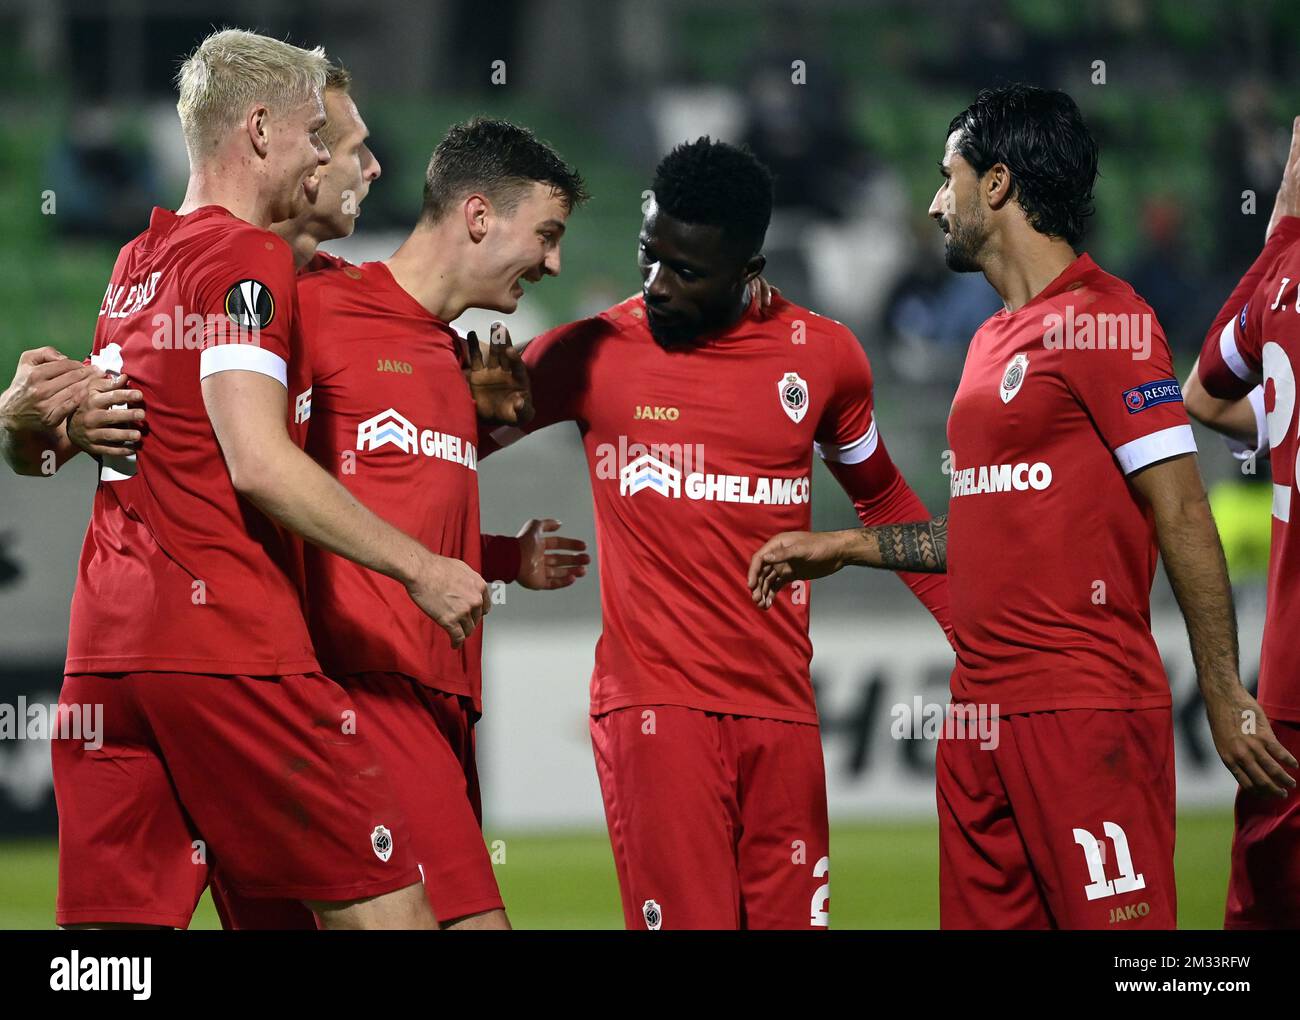 Antwerp's Pieter Gerkens celebrates after scoring during a soccer match between Bulgarian club PFK Ludogorets and Belgian team Royal Antwerp FC, Thursday 22 October 2020, in Razgrad, Bulgaria, on the first day of the group phase (group J) of the UEFA Europa League competition. BELGA PHOTO DIRK WAEM Stock Photo